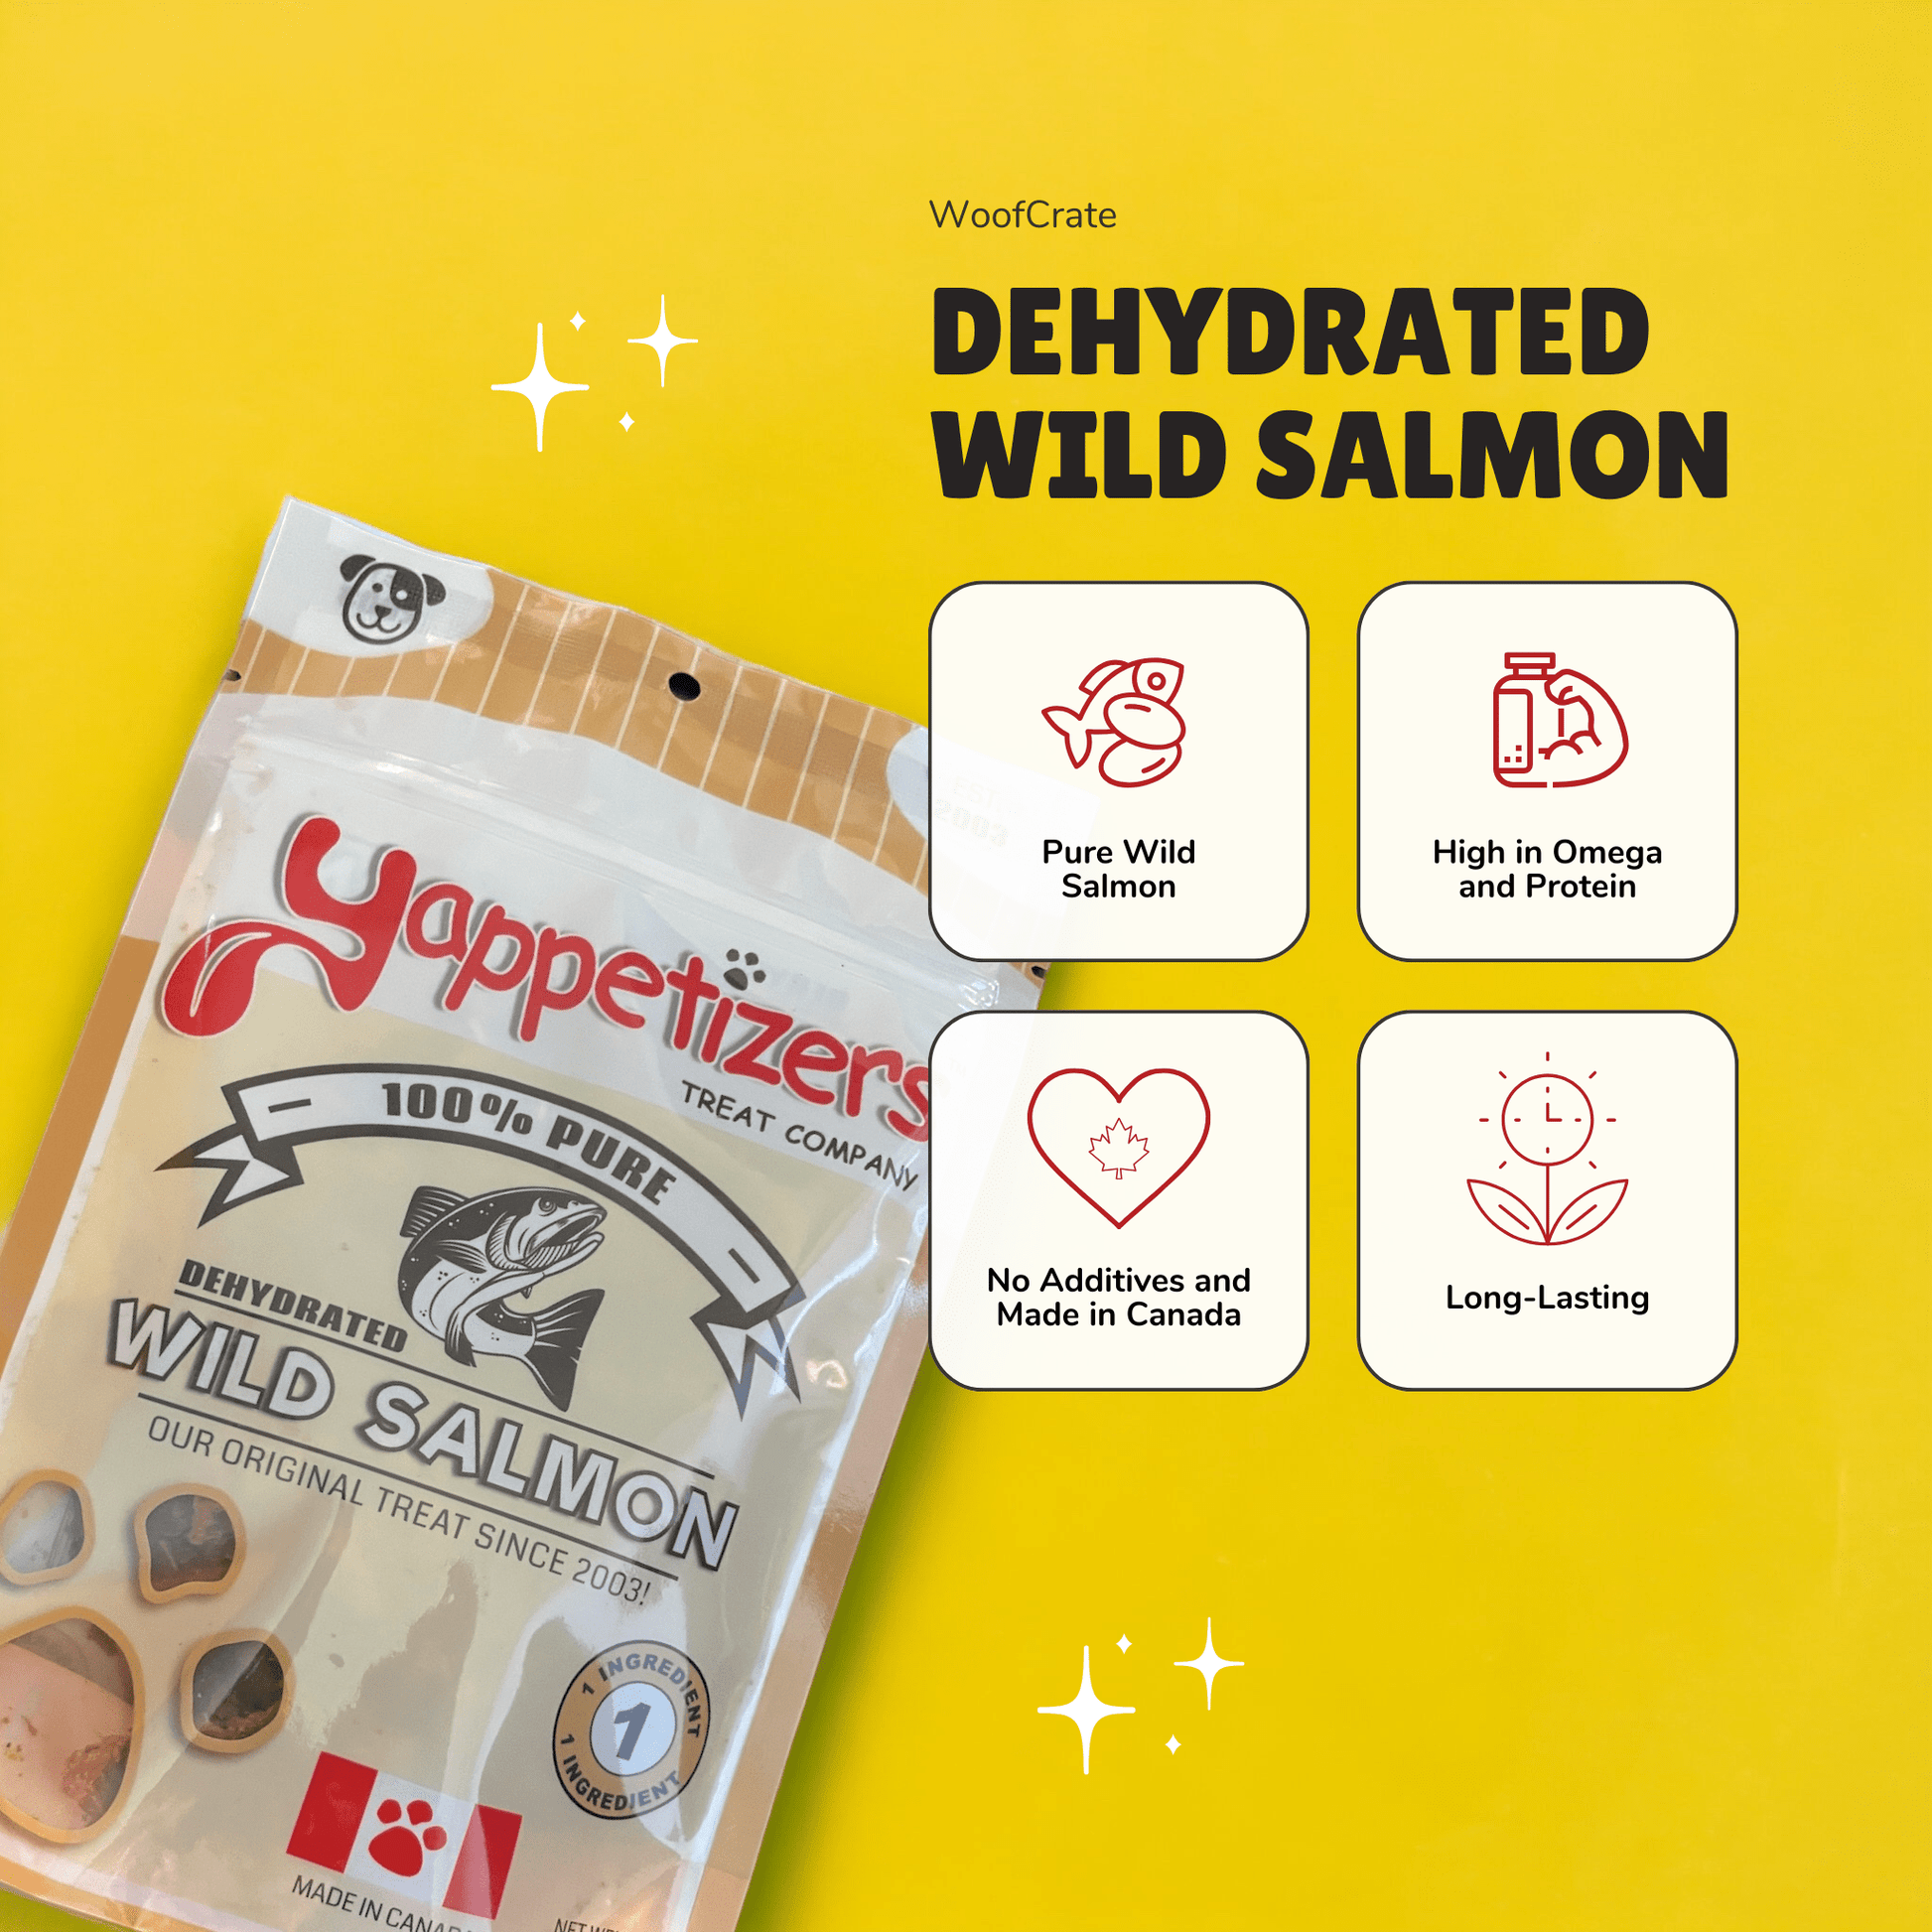 Benefits of dehydrated salmon treats for dogs side by side with a bag of salmon dog treats. The benefits include being high in omega and protein, having no additives, being made in Canada, and are long lasting.